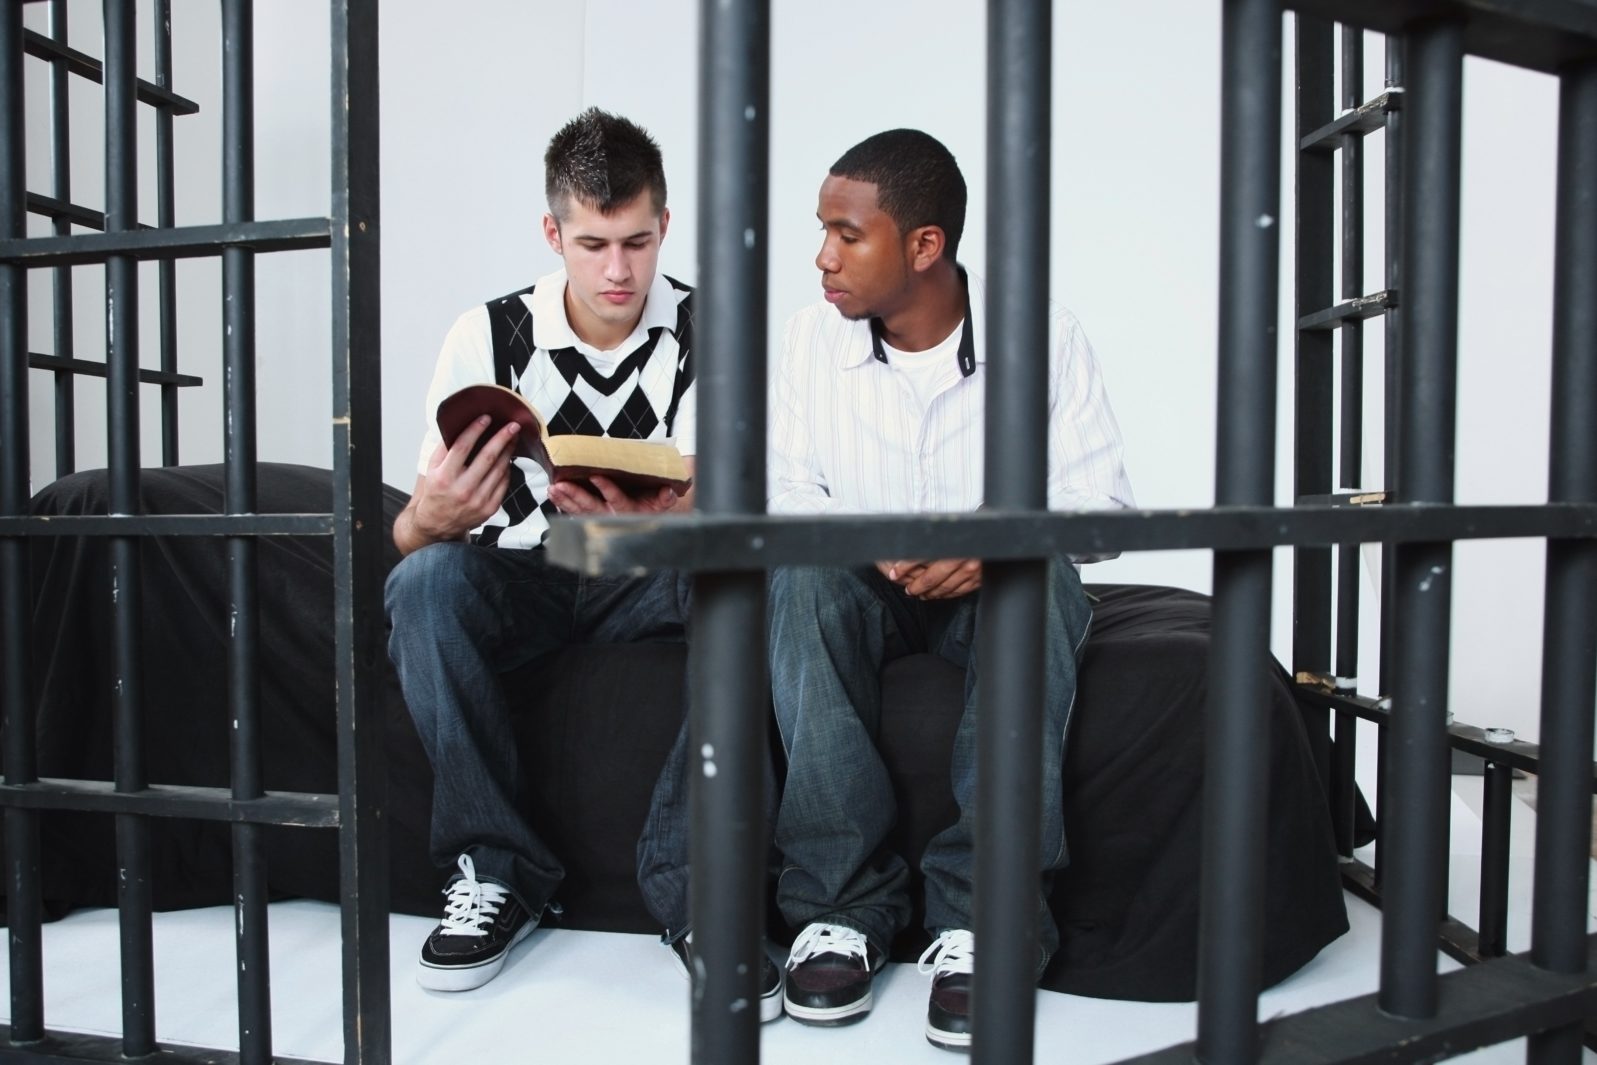 A Young Man Reading The Bible To Another Young Man In Jail